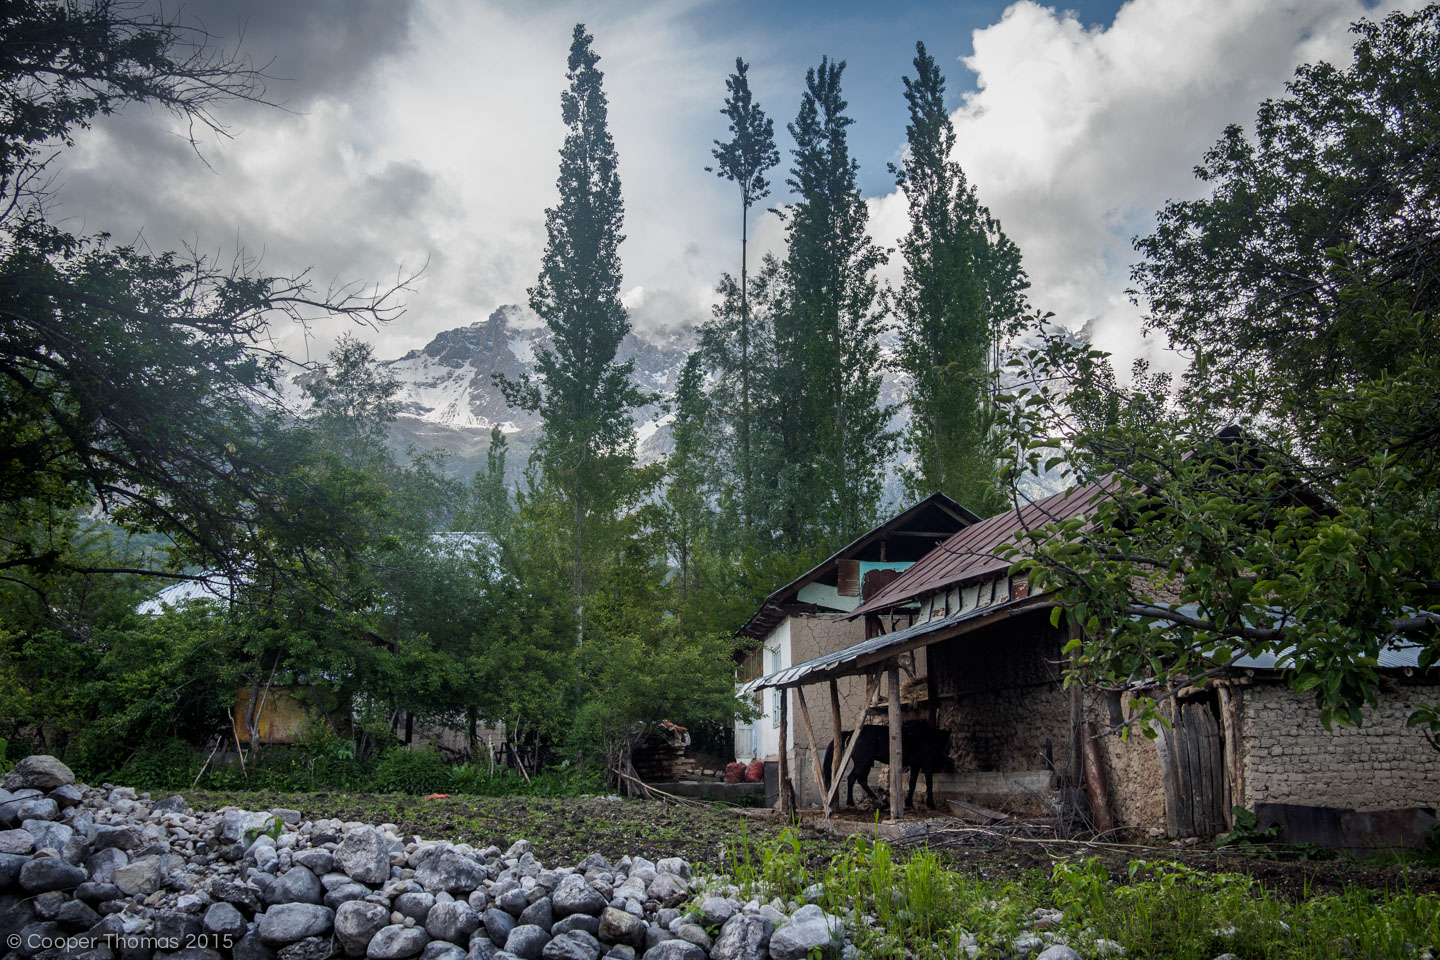 A view of the Babash-Ata Mountains from the guesthouse backyard